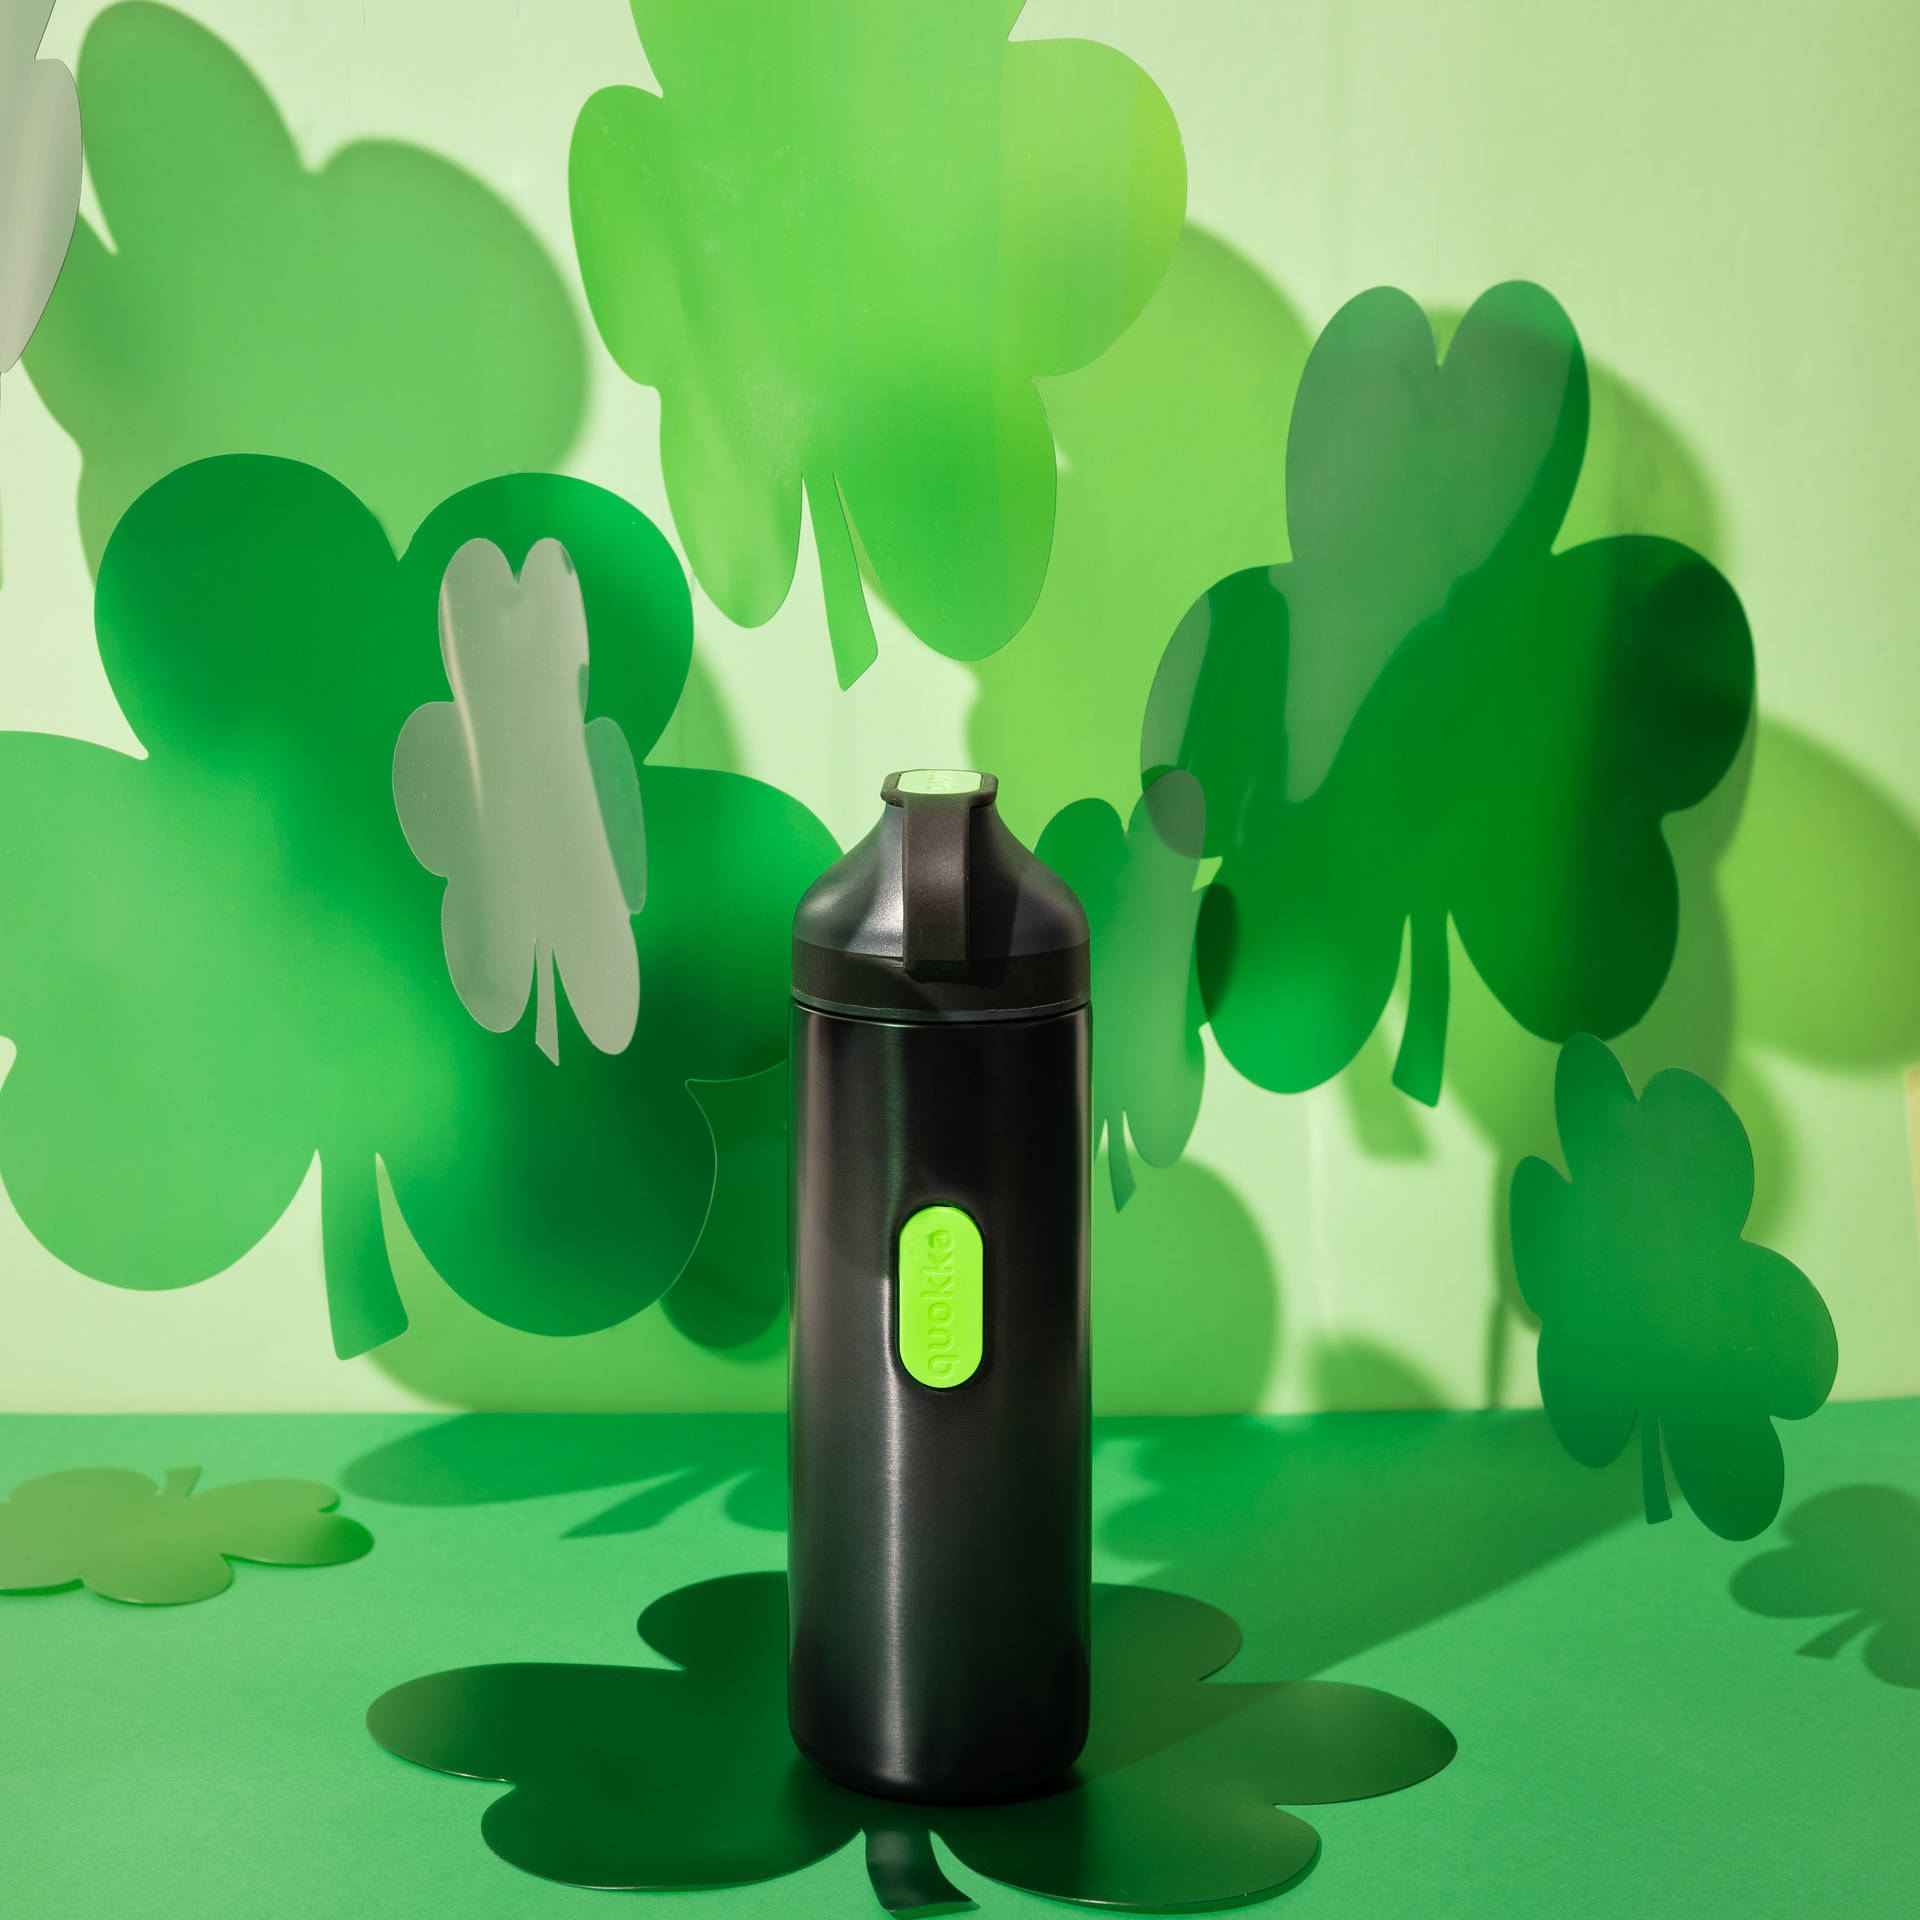 Black Water Bottle With Saint Patrick’s Day Imagery Background